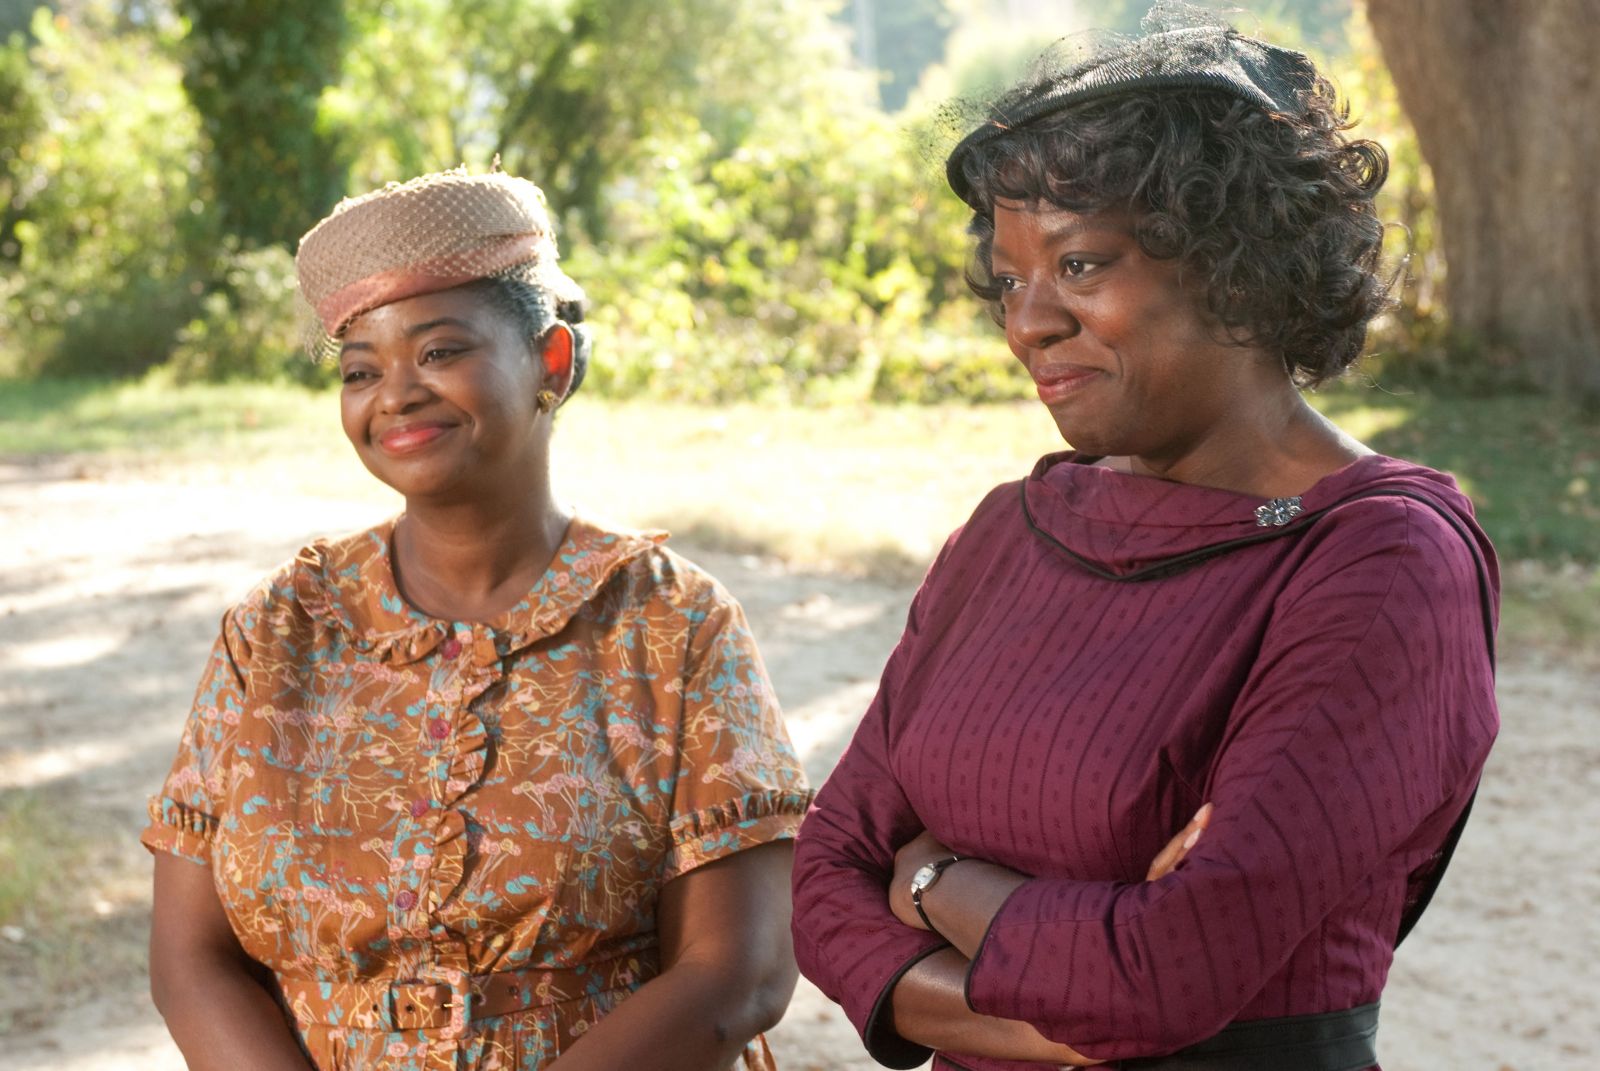 the help movie review essay